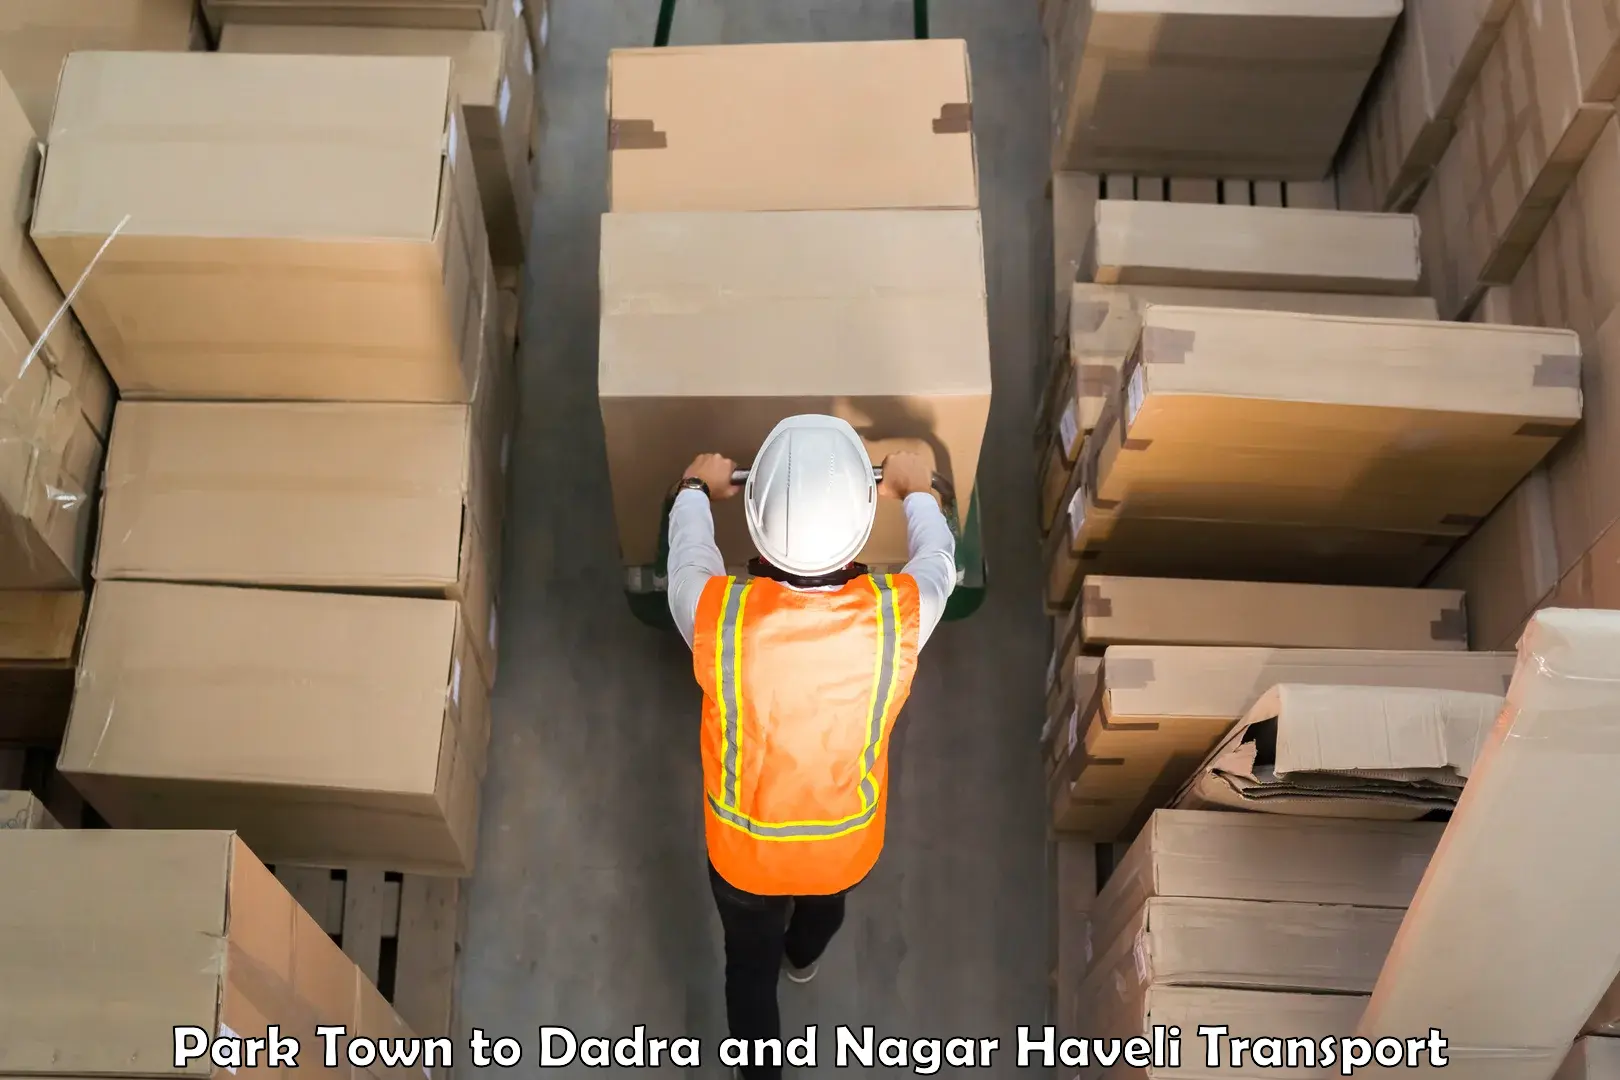 Nationwide transport services Park Town to Dadra and Nagar Haveli